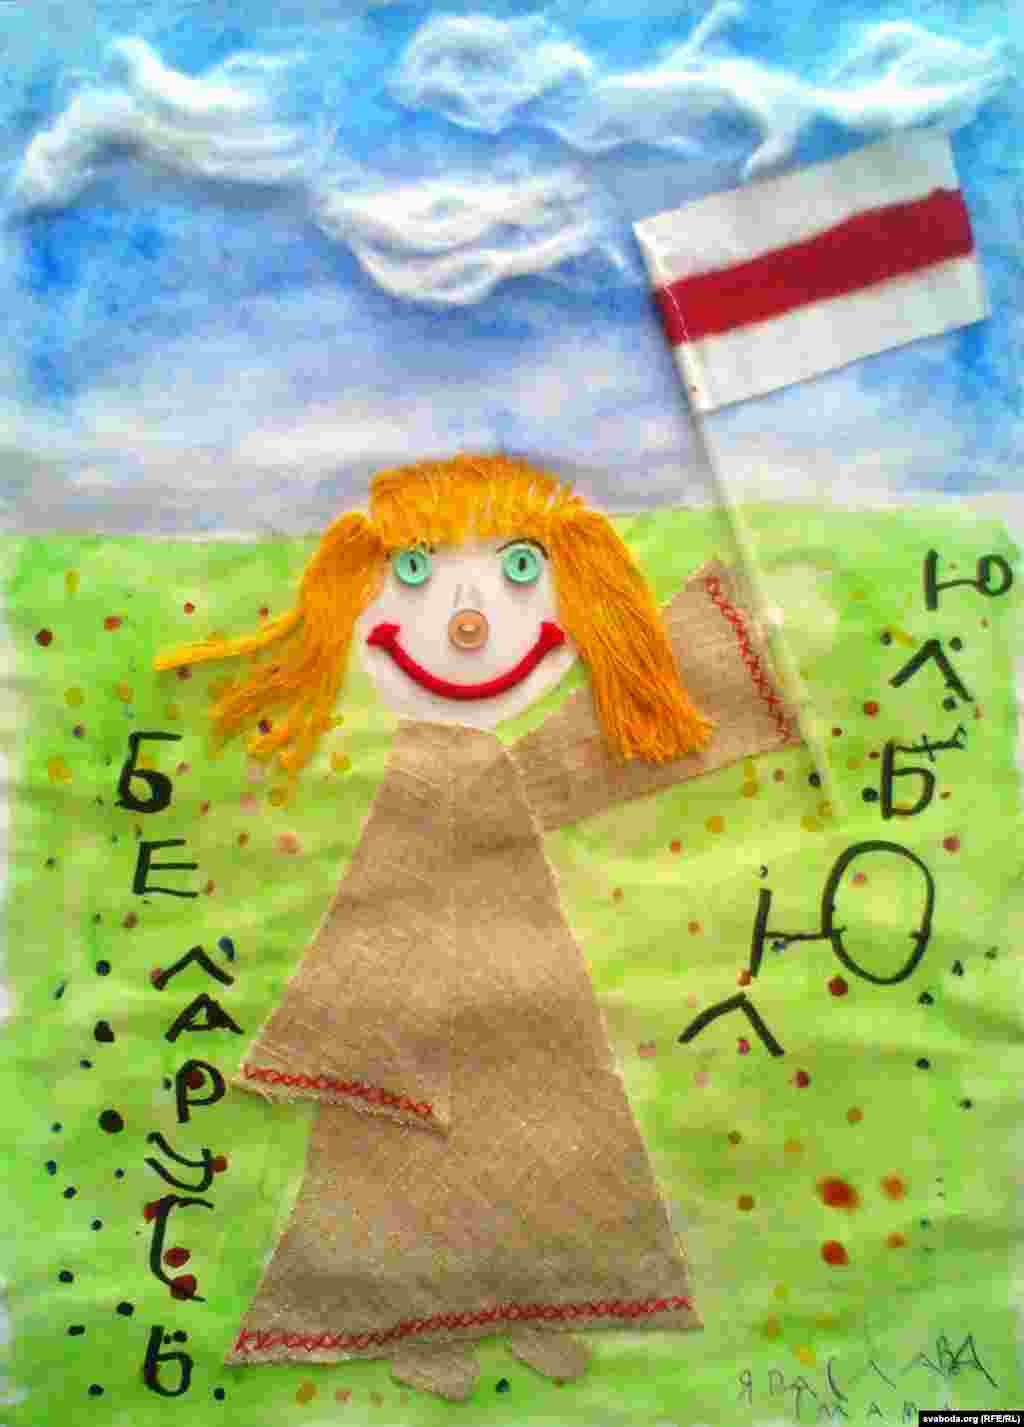 This submission came from a 5-year-old girl and features the forbidden red and white flag of the Belarusian National Republic, the independent state that lasted for less than a year in 1918, and which also served as the country&#39;s flag from 1991-95.